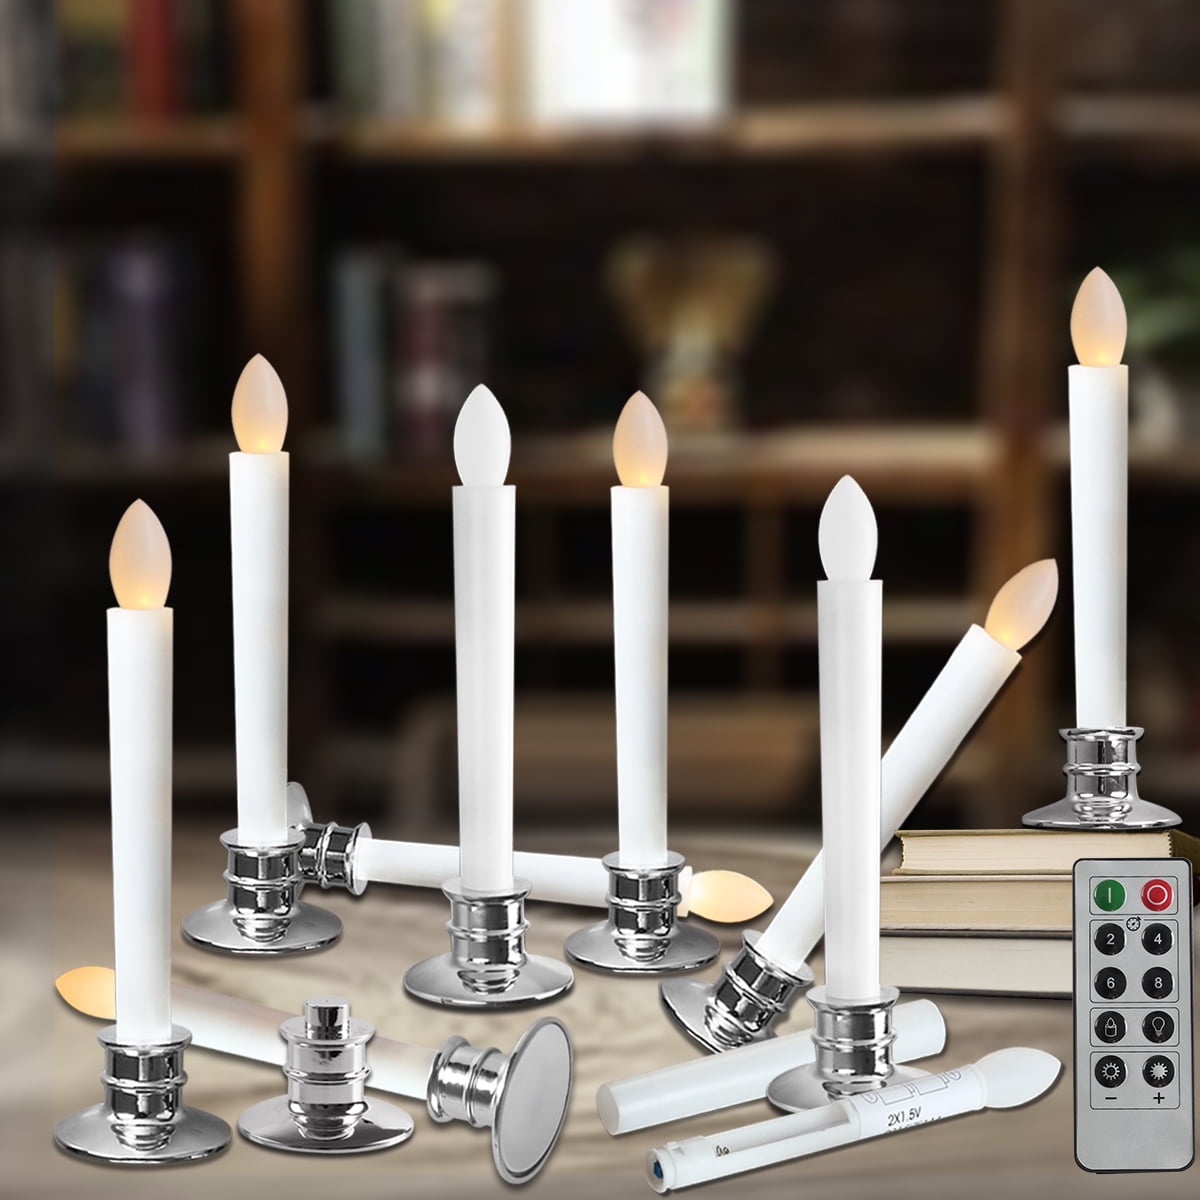 9 Inch Battery Operated White LED Taper Window Candles for Christmas Dining Wedding Decor Wondise Flickering Flameless Taper Candles with Timer 0.78 x 9.64 Inch Set of 6